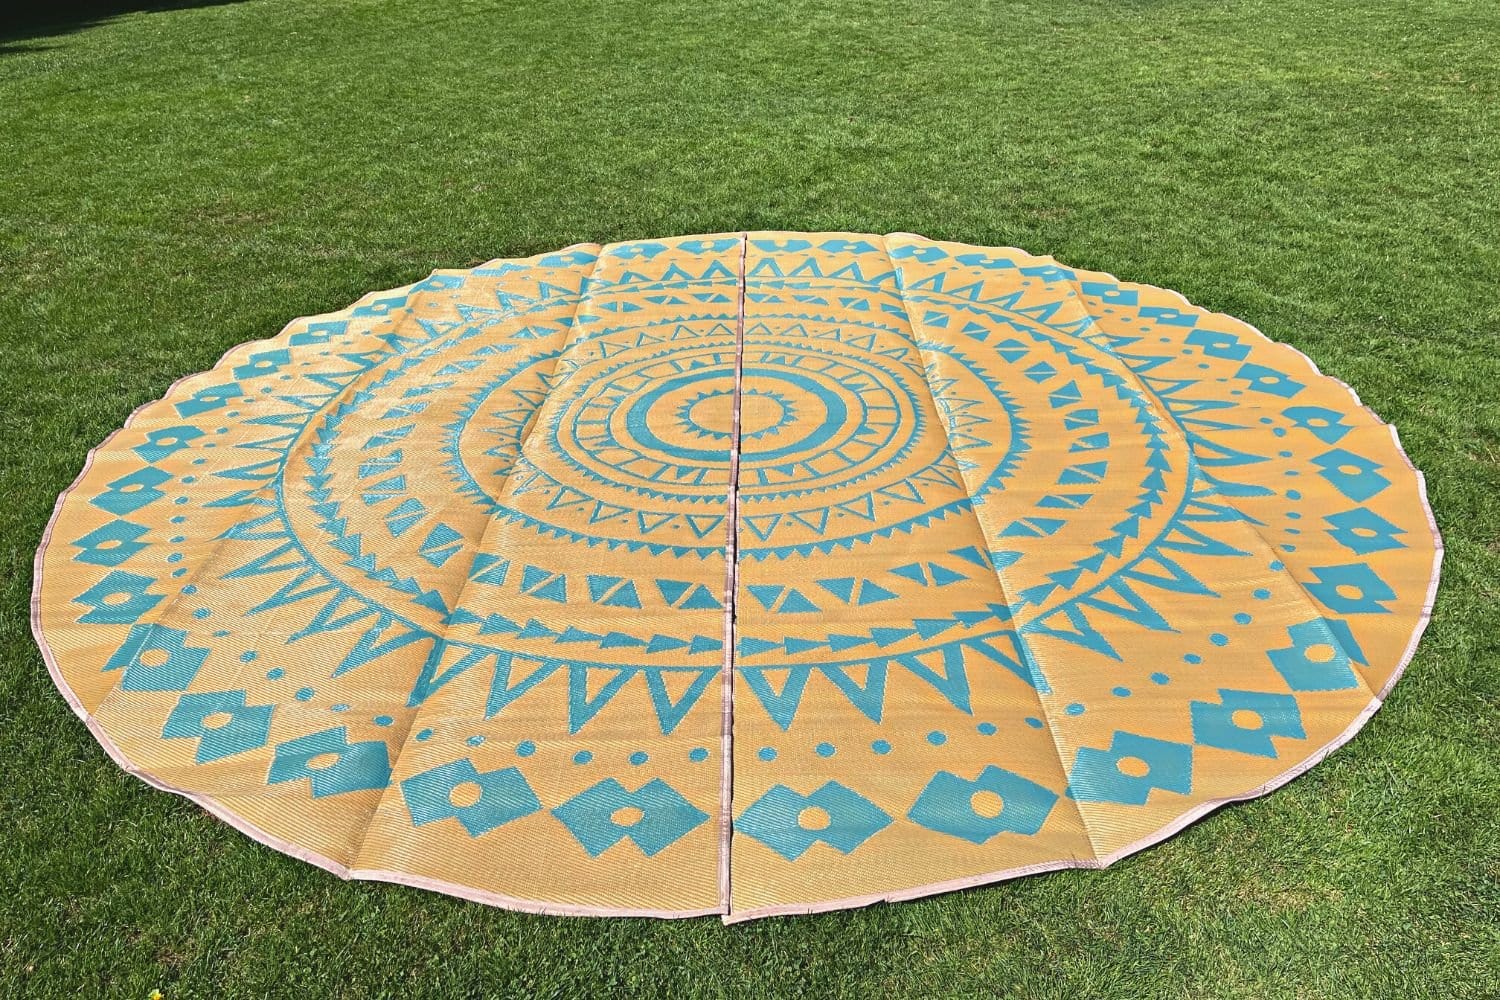 LIFE IN TENTS Bell Tents 6 Meter / 19ft Diameter Life In Tent Boho Style Bell Tent Floor Matting Cover | 16' (5M)- LITBSBTFMC